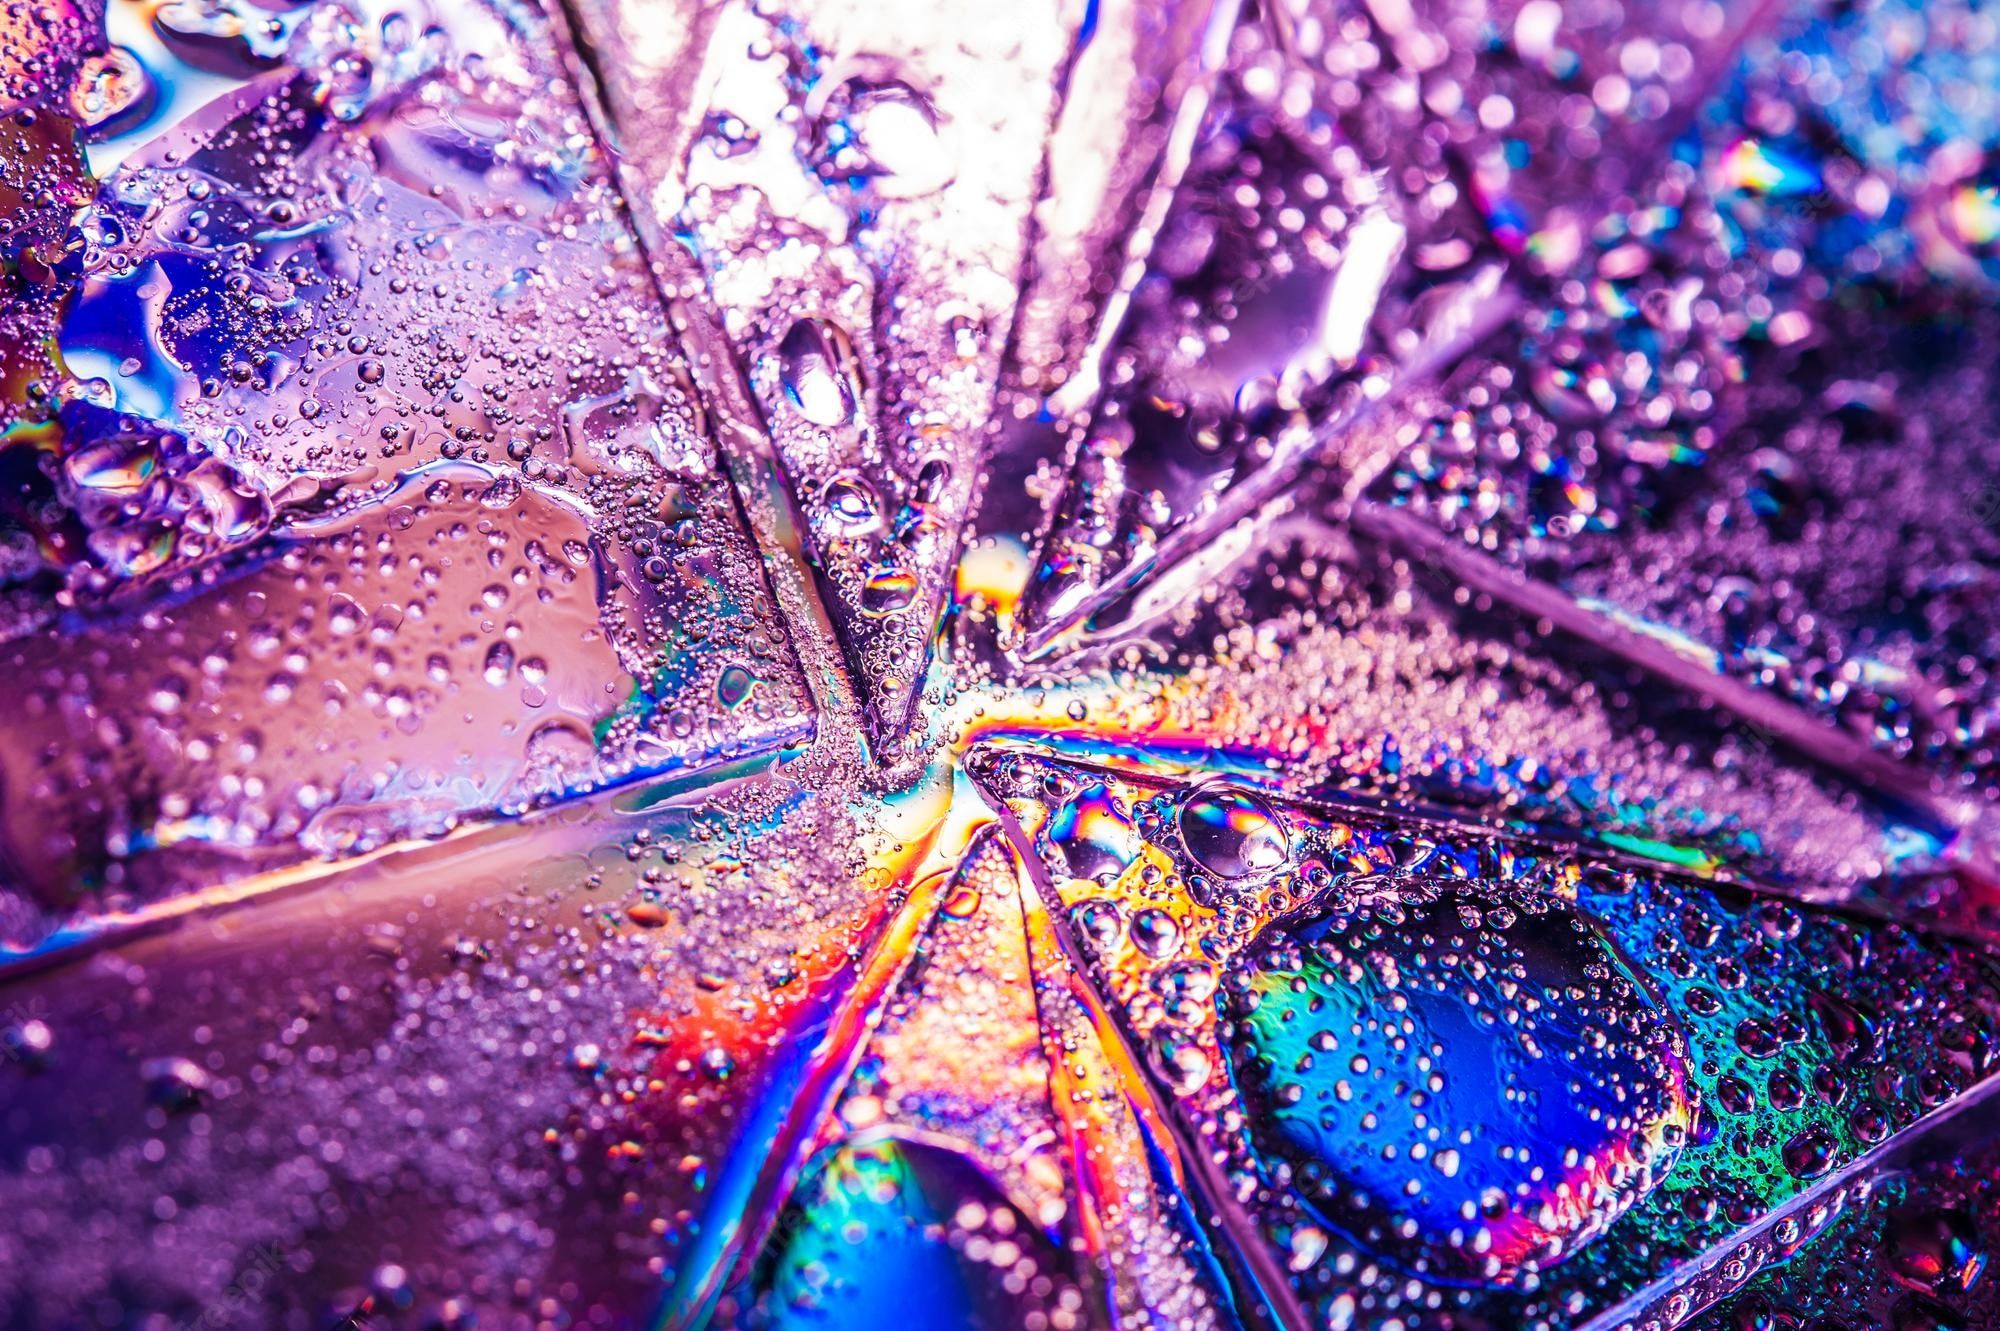 Premium Photo. Abstract Trendy Holographic Background In The Style Of The 80 90s. Real Texture Of Broken Glass Or Ice And Water Drops In Bright Acid Colors. Synthwave Vaporwave Webpunk Massurrealism Aesthetics